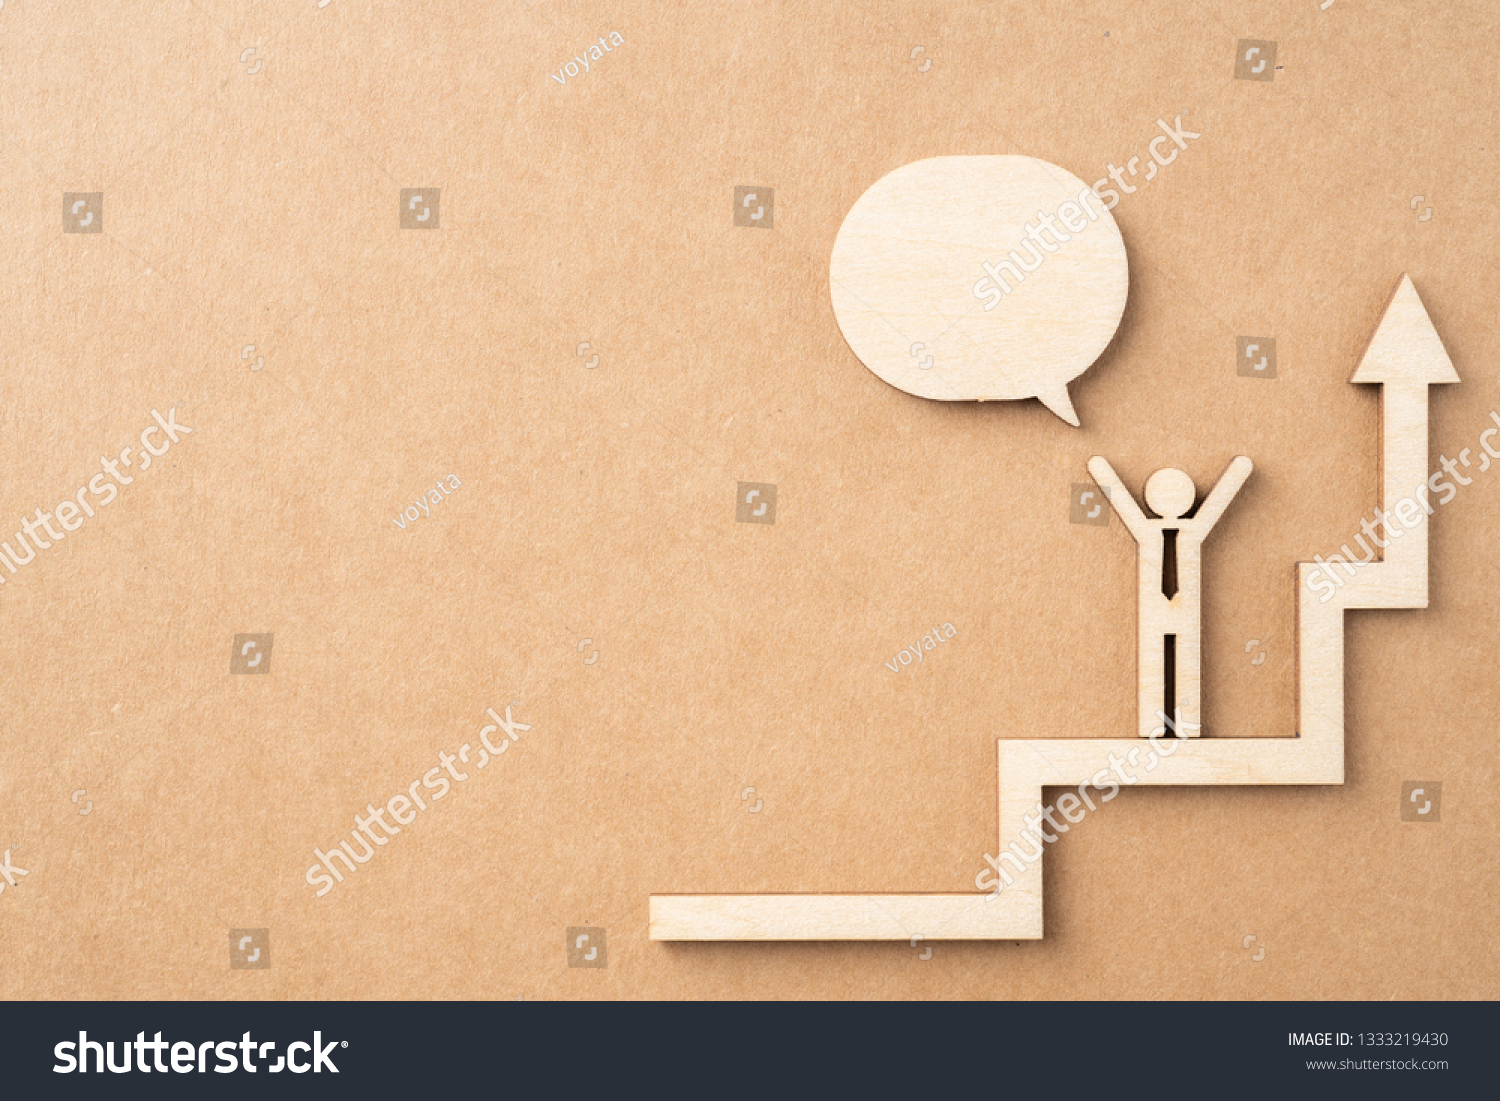 Business and design concept - group of wooden businessman icon with dialogue frame on kraft paper. it's conversation, leadership concept #1333219430